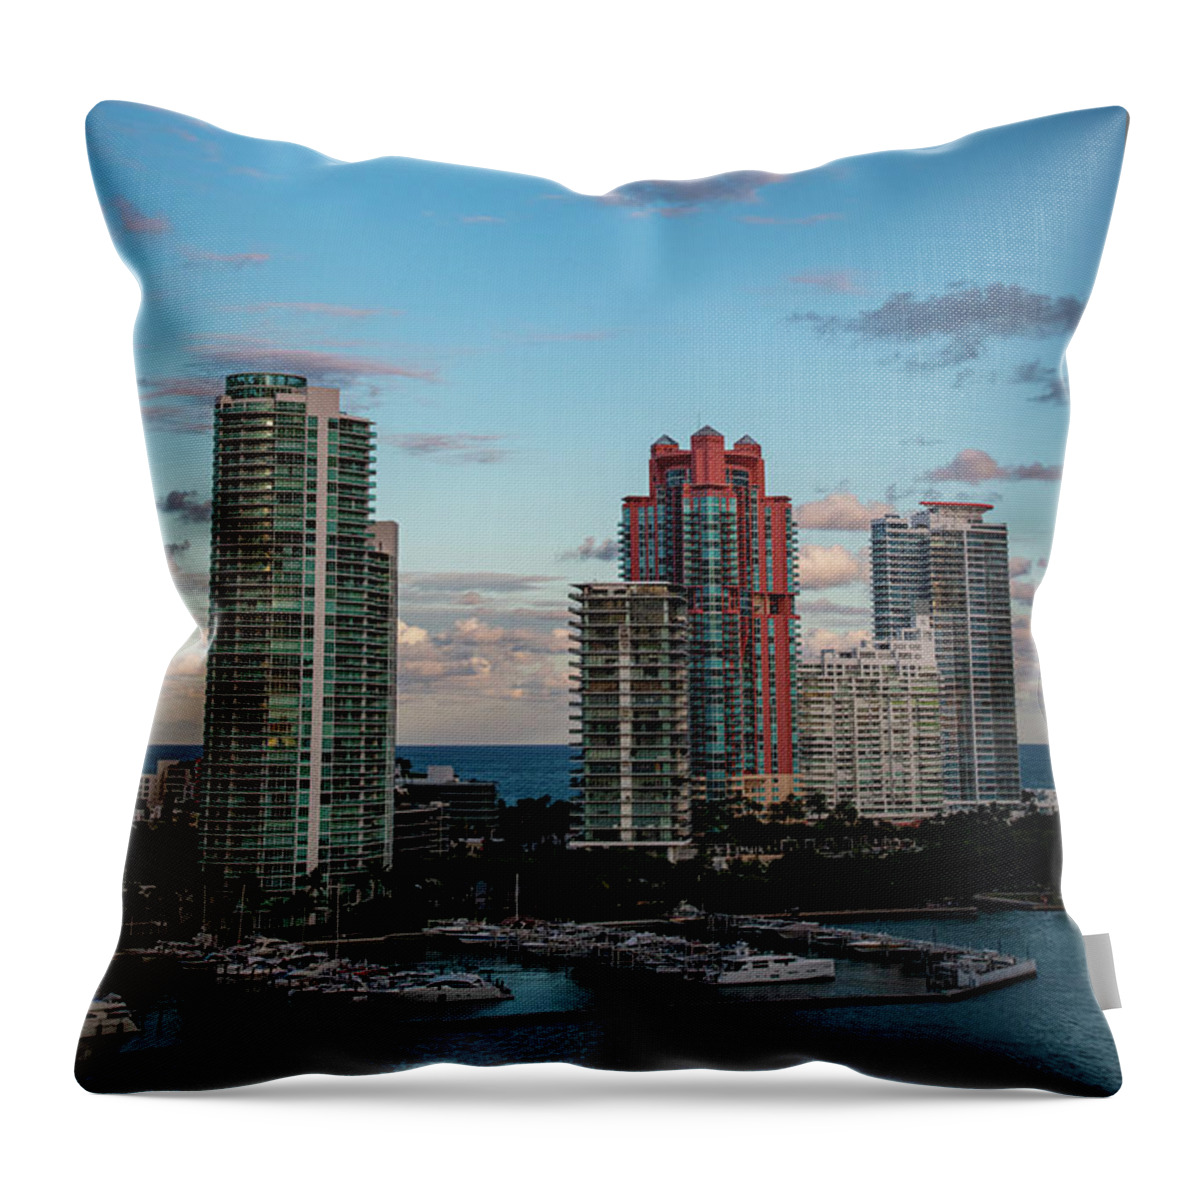 Miami Throw Pillow featuring the photograph Moonrise Over Miami by Robert J Wagner